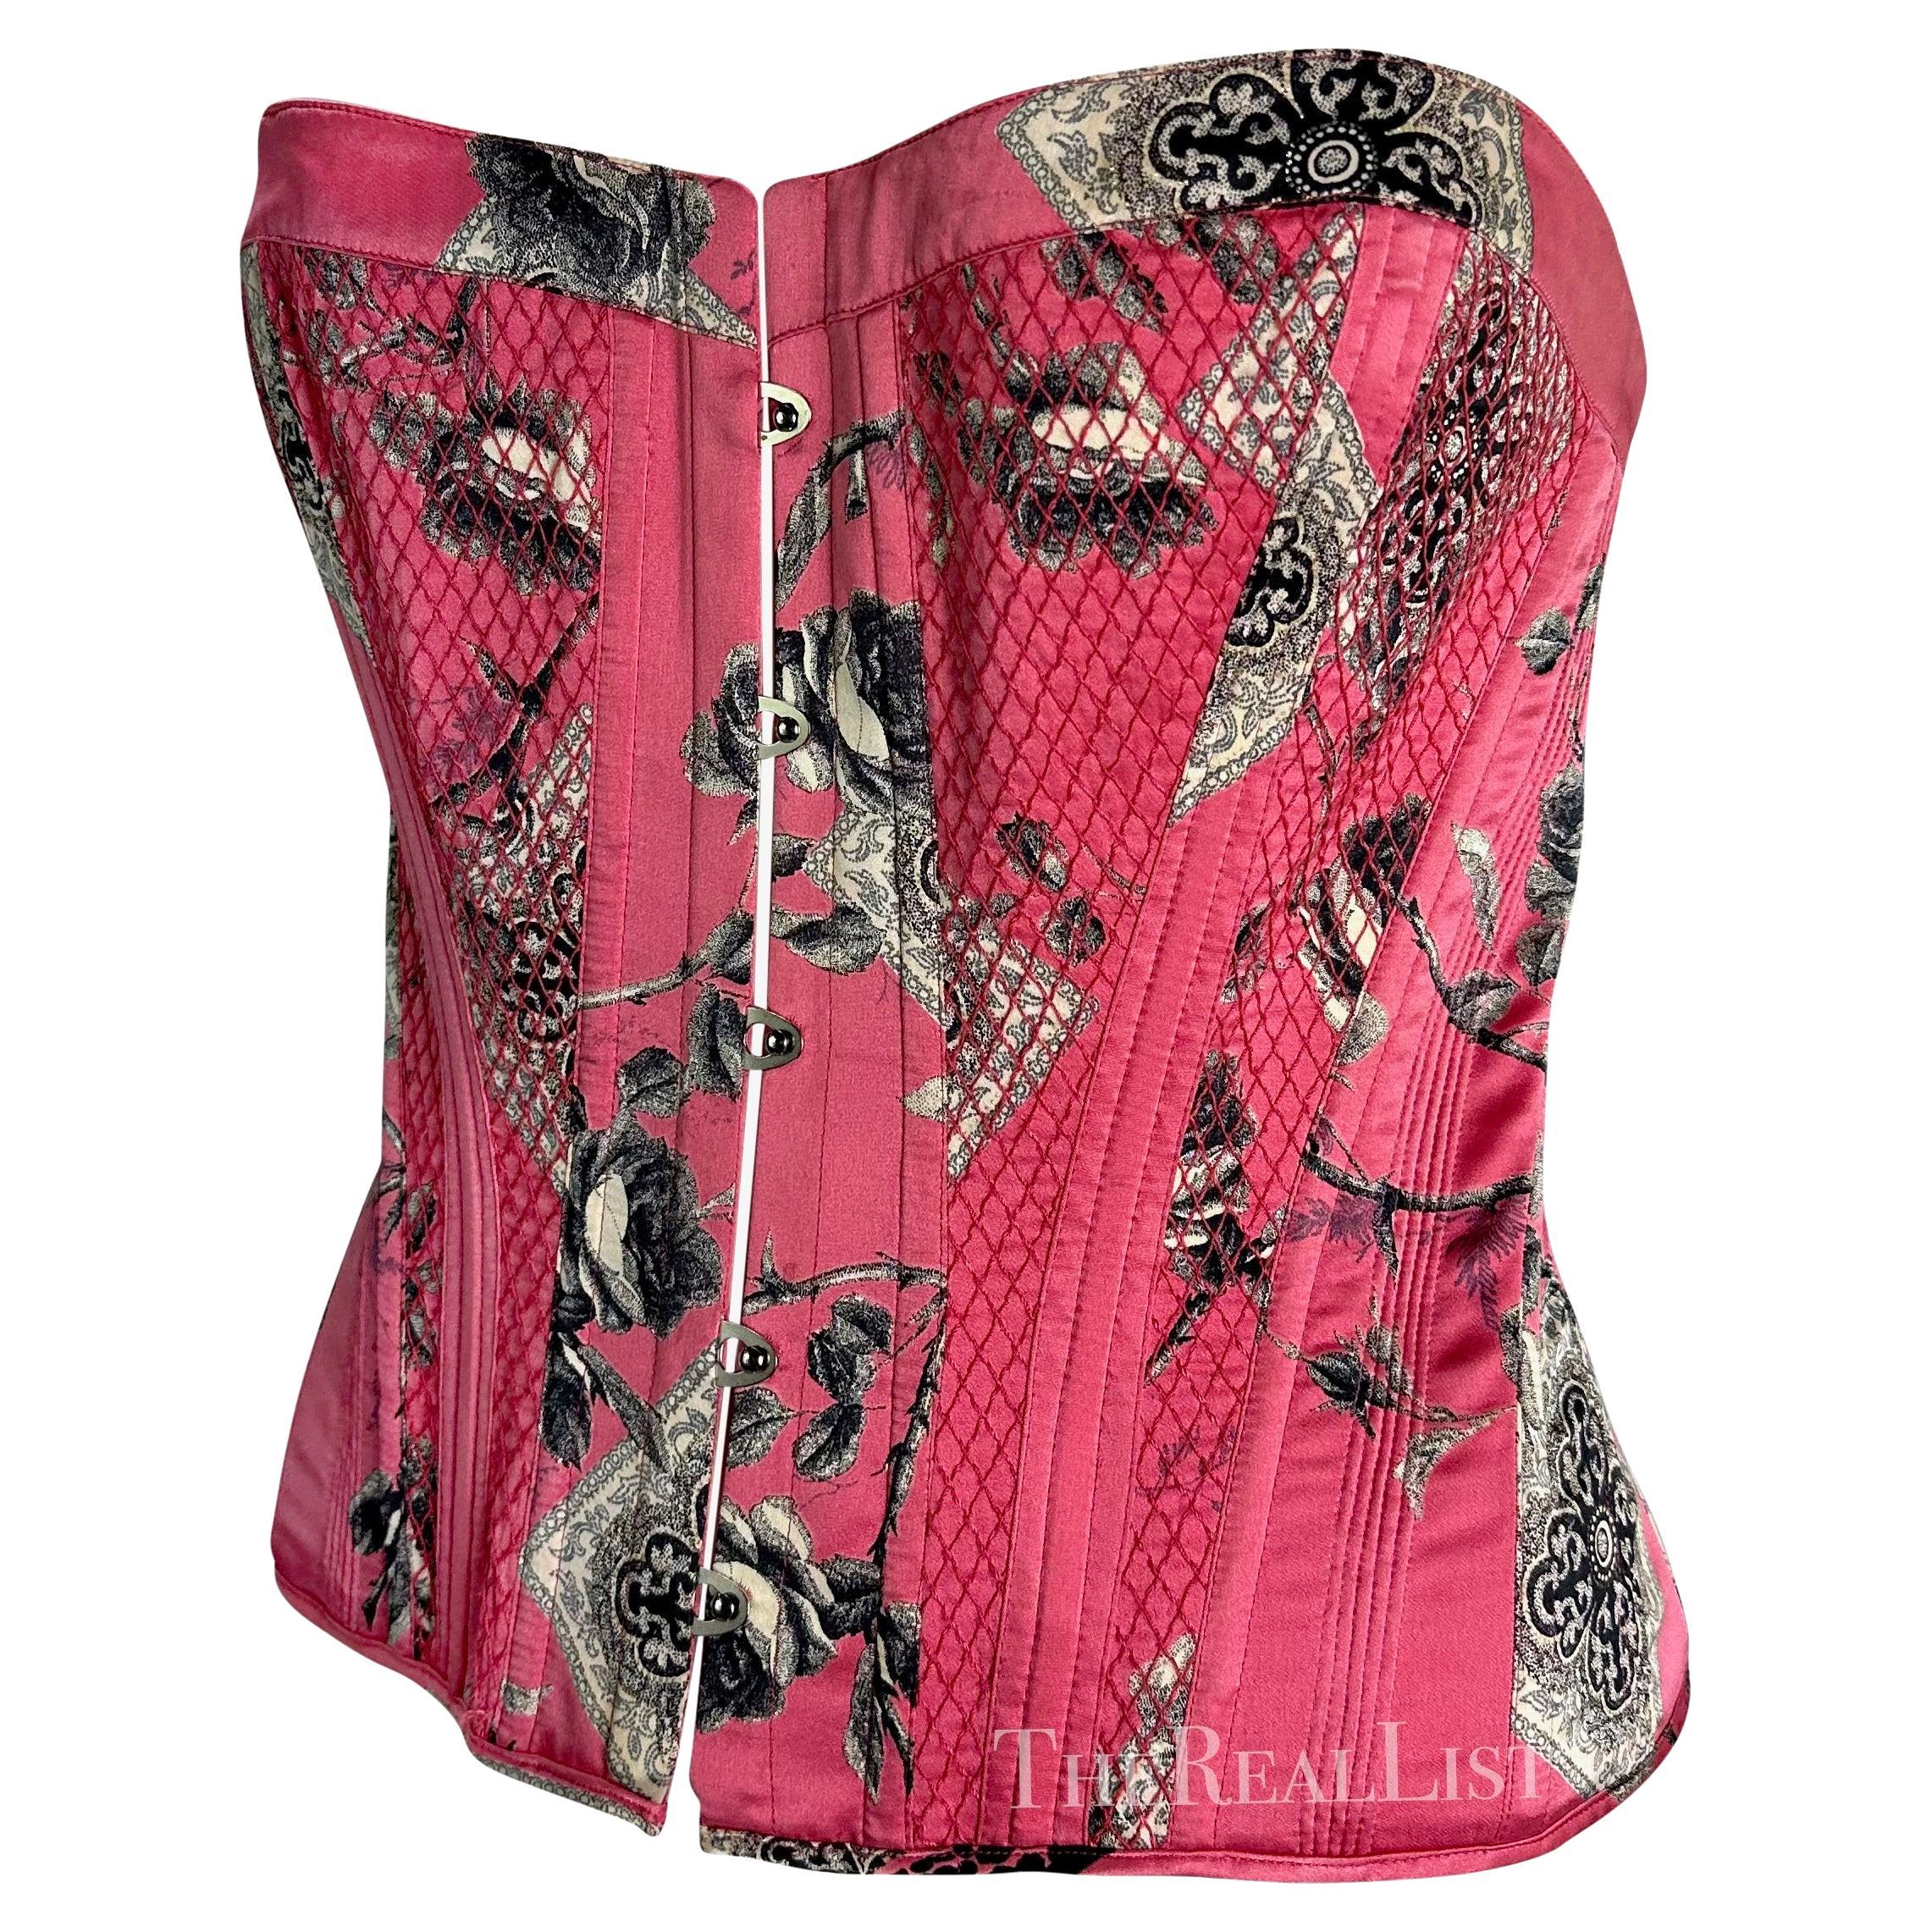 Presenting a bright pink floral Roberto Cavalli corset. From 2004, this fabulous corset features a steel hook eye closure at the front and a lace-up closure at the back. This sexy top is made complete with curved boning and a quilted